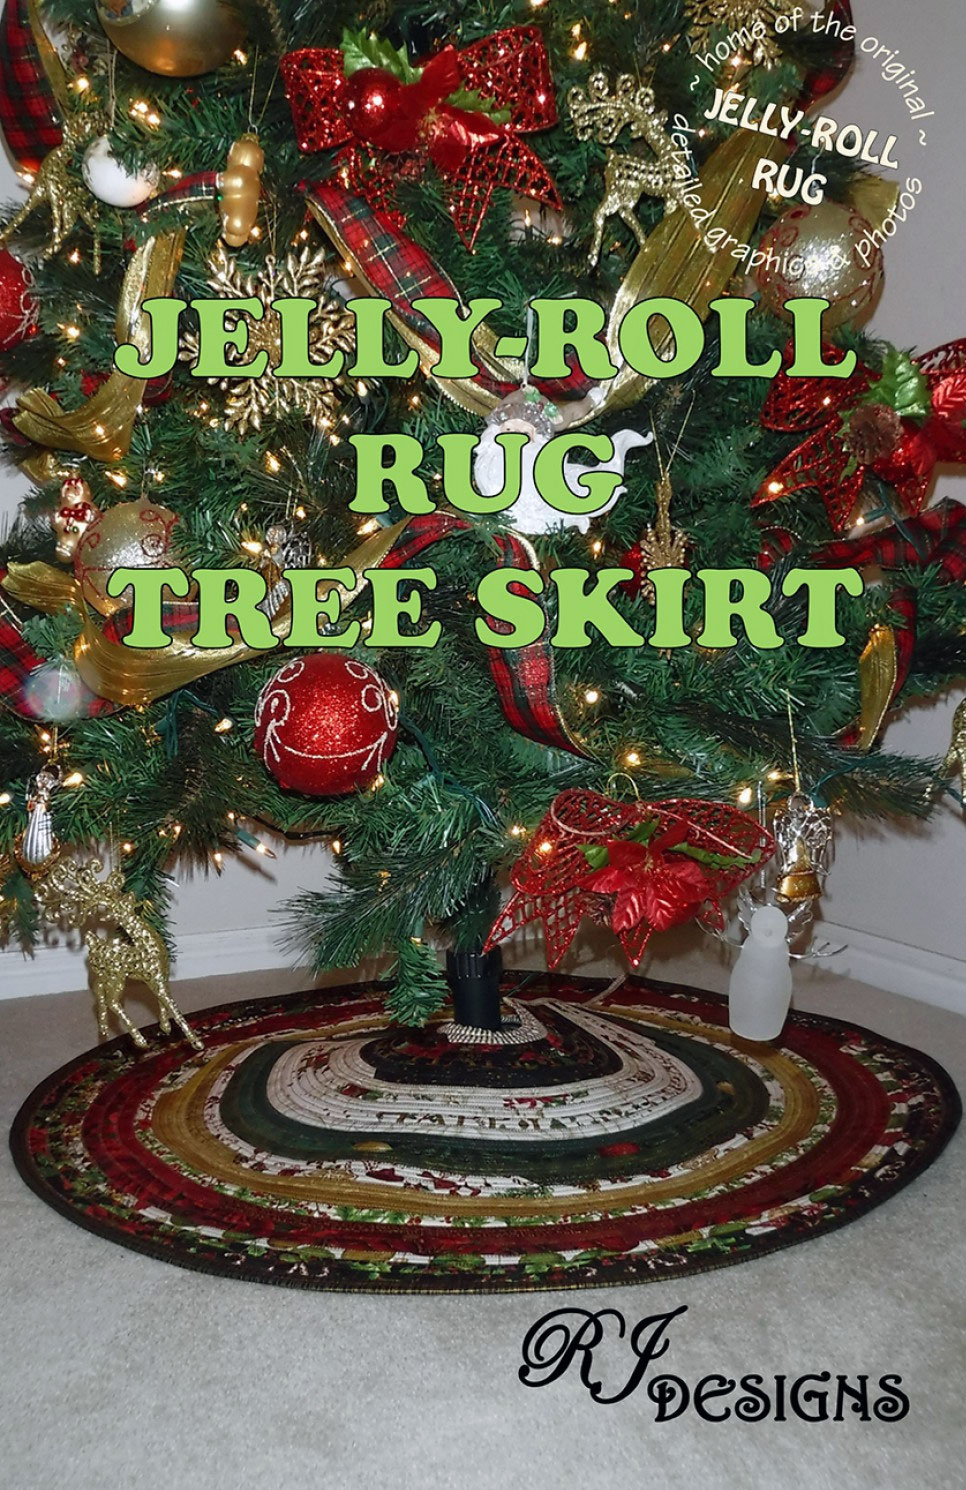 Jelly-Roll-Rug-Christmas-Tree-Skirt-sewing-pattern-from-RJ-designs-front